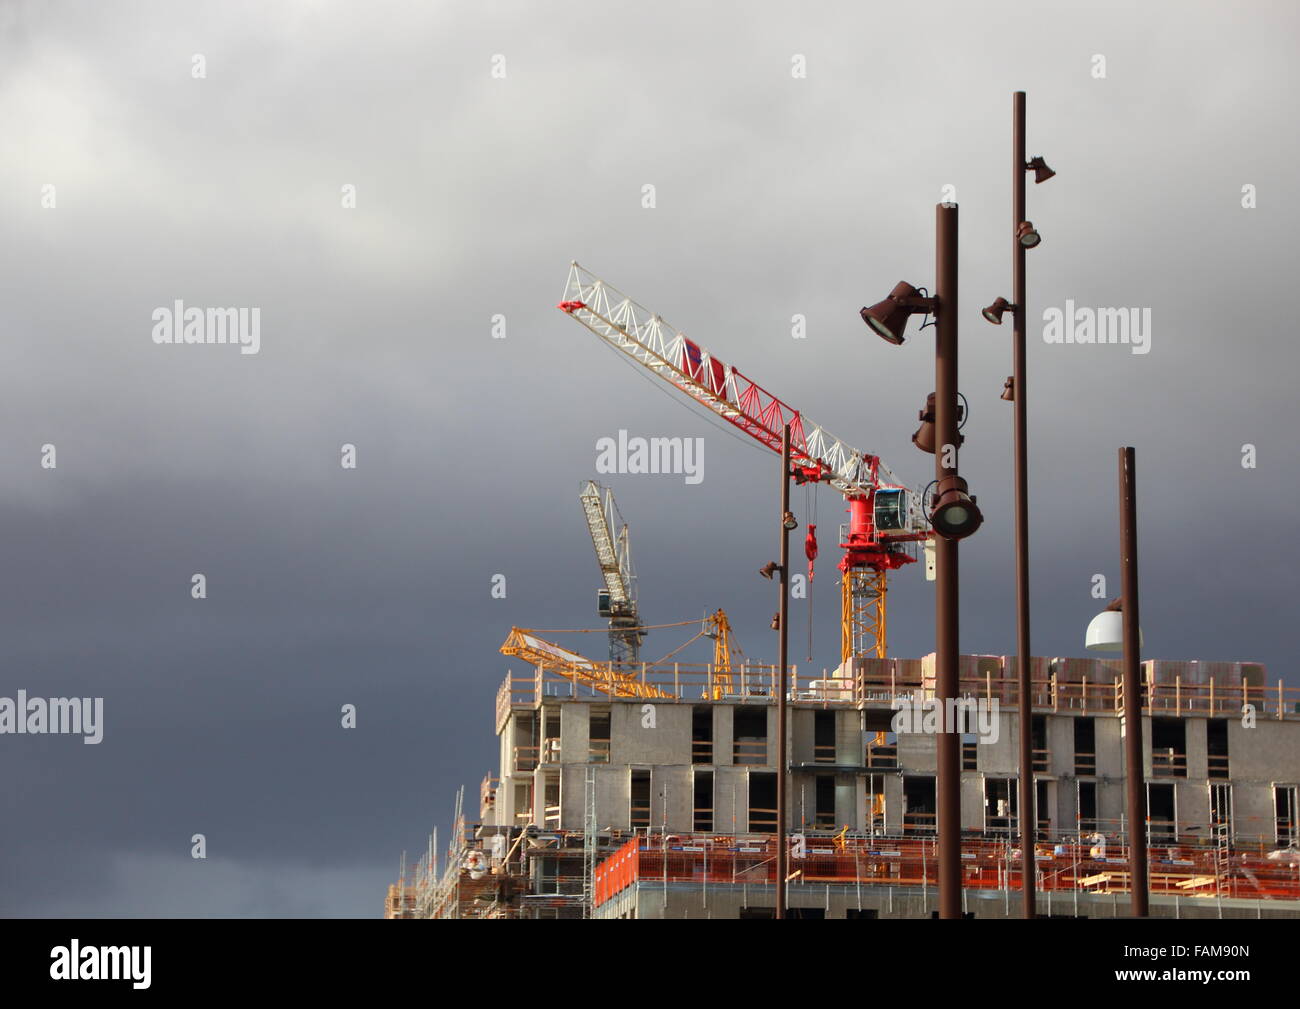 Building Site Cranes and Street Lamps with Dark Clouds Stock Photo